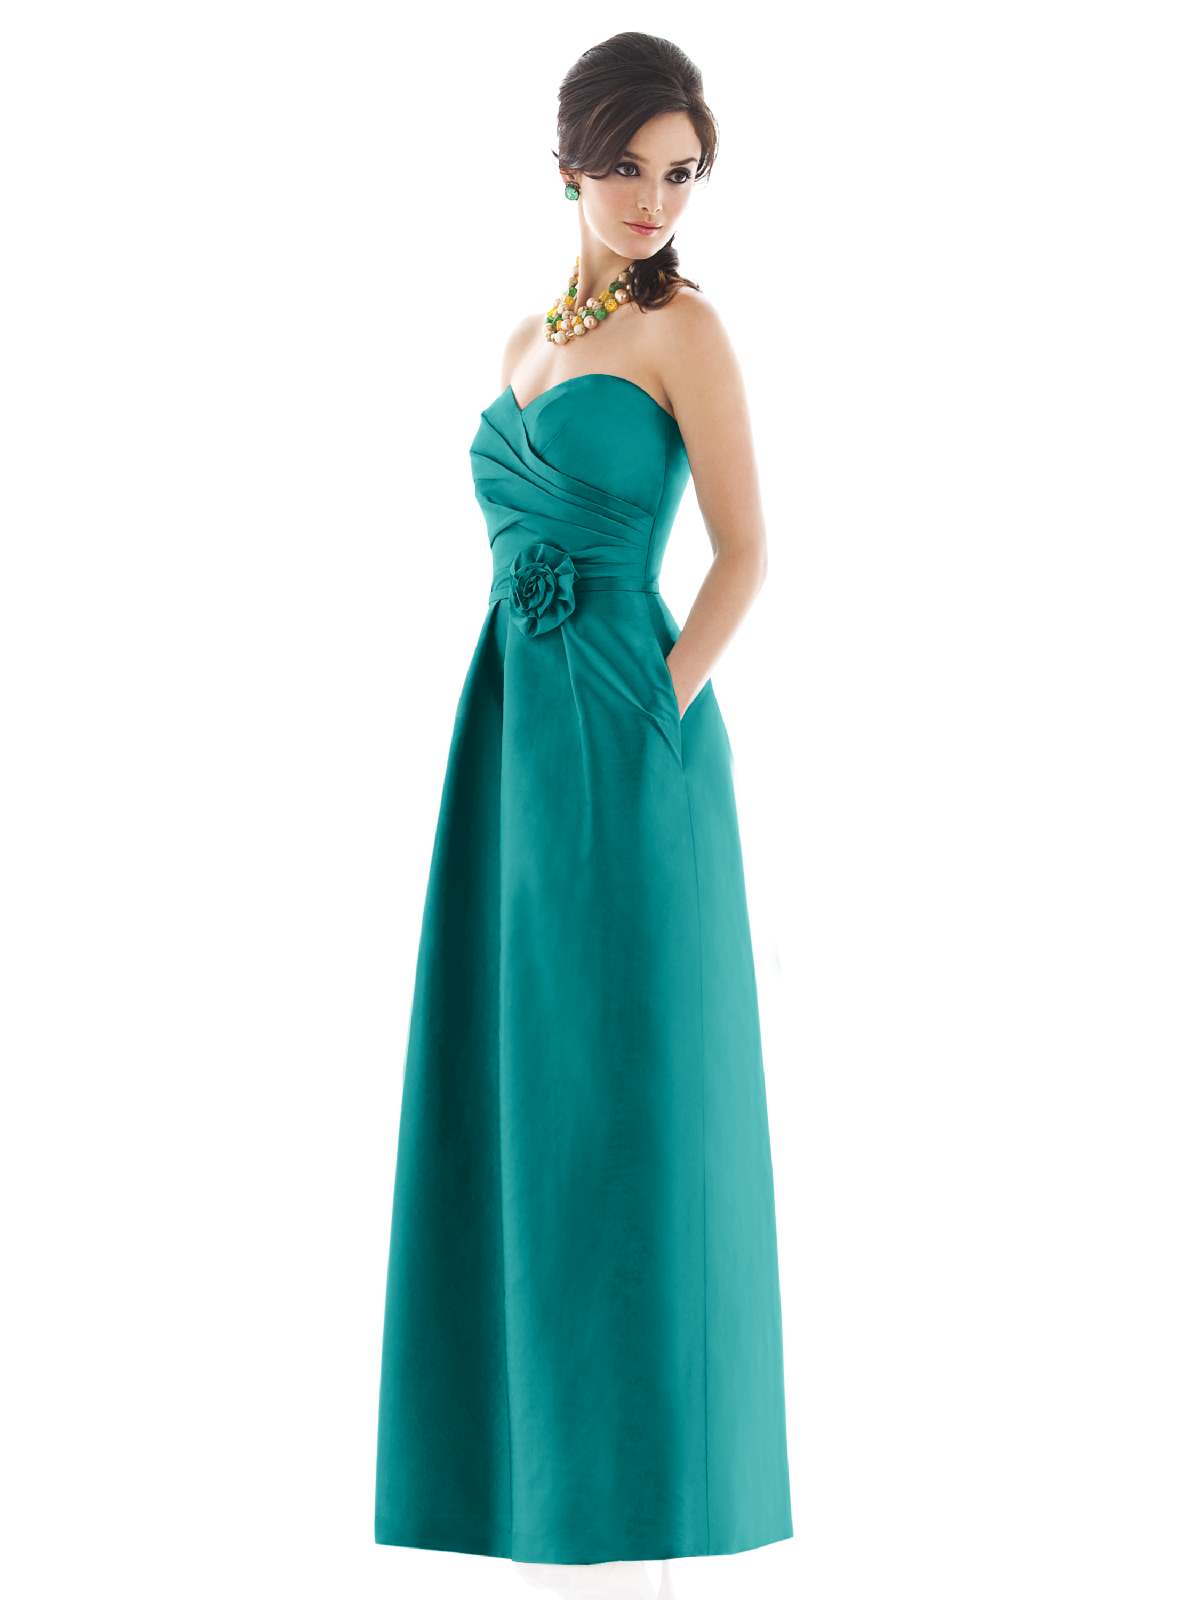 Teal A Line Strapless Sweetheart Zipper Floor Length Satin Prom Dresses With Drapes And Flowers 